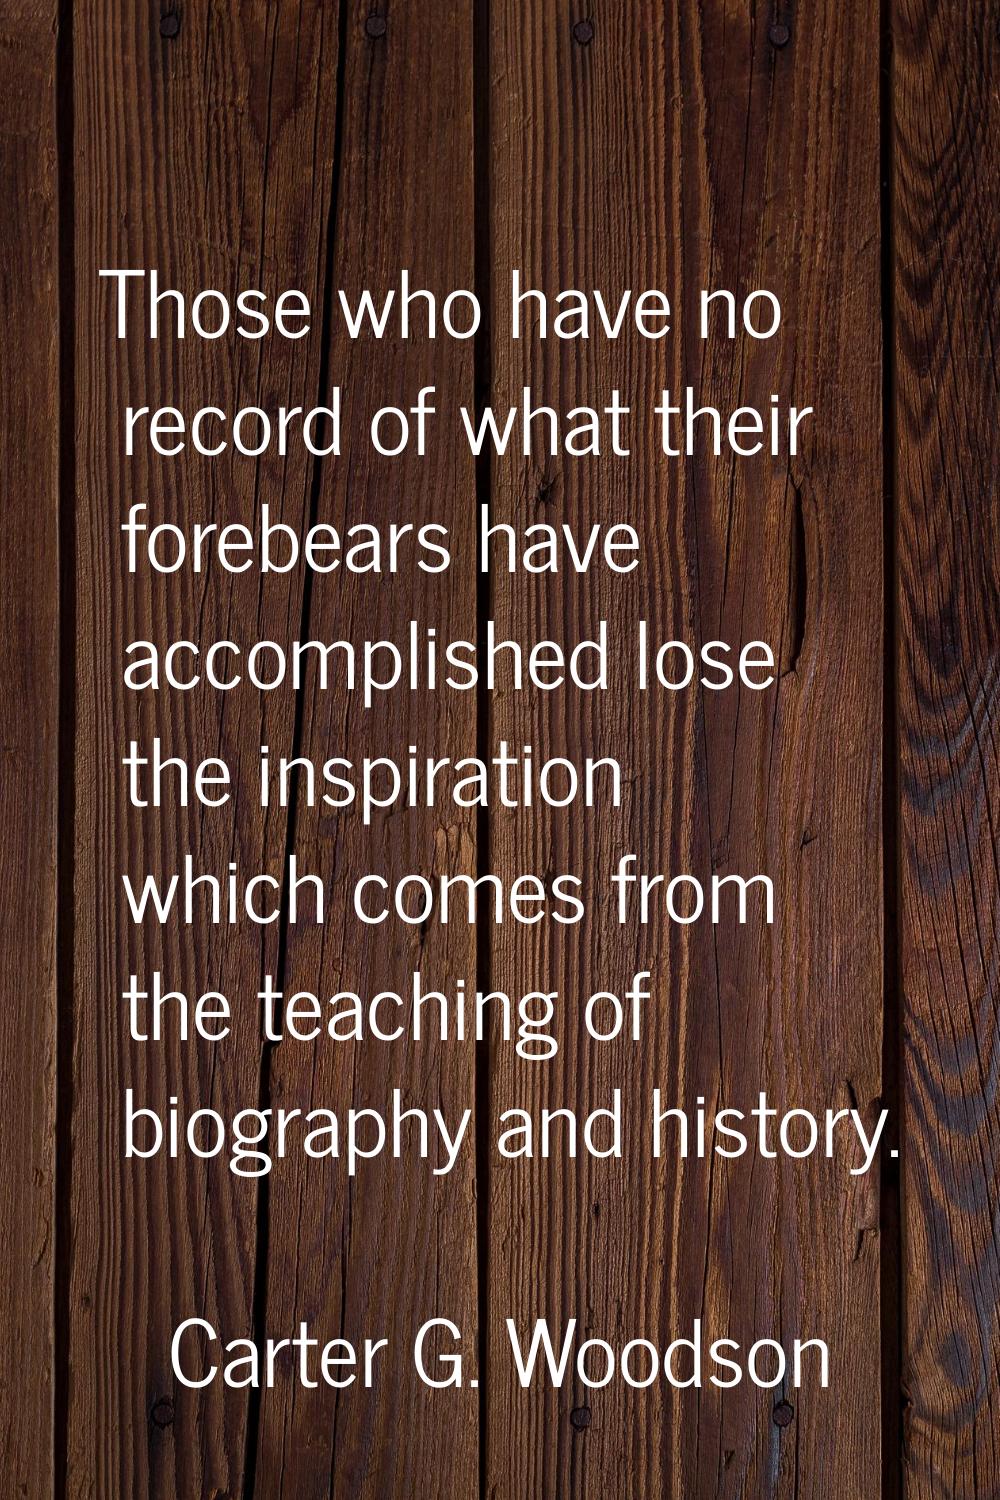 Those who have no record of what their forebears have accomplished lose the inspiration which comes